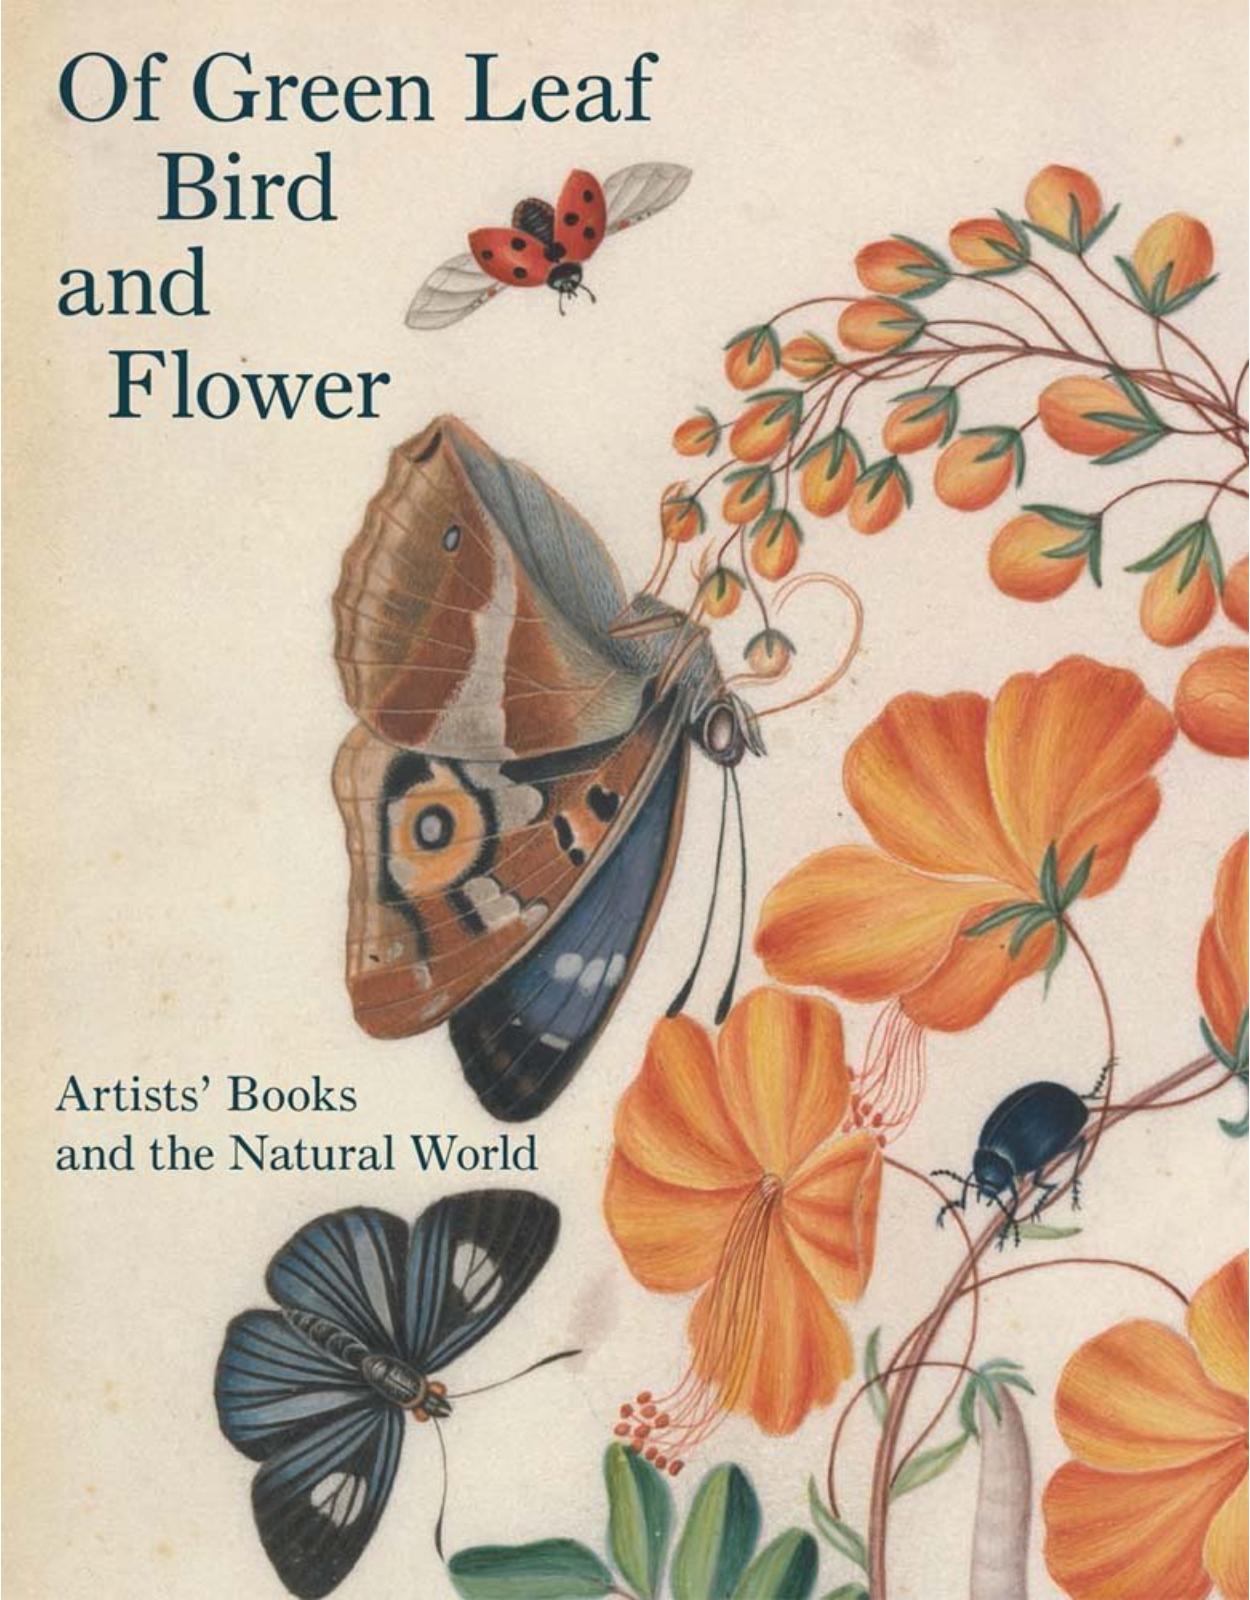 Of Green Leaf, Bird, and Flower. Artists' Books and the Natural World